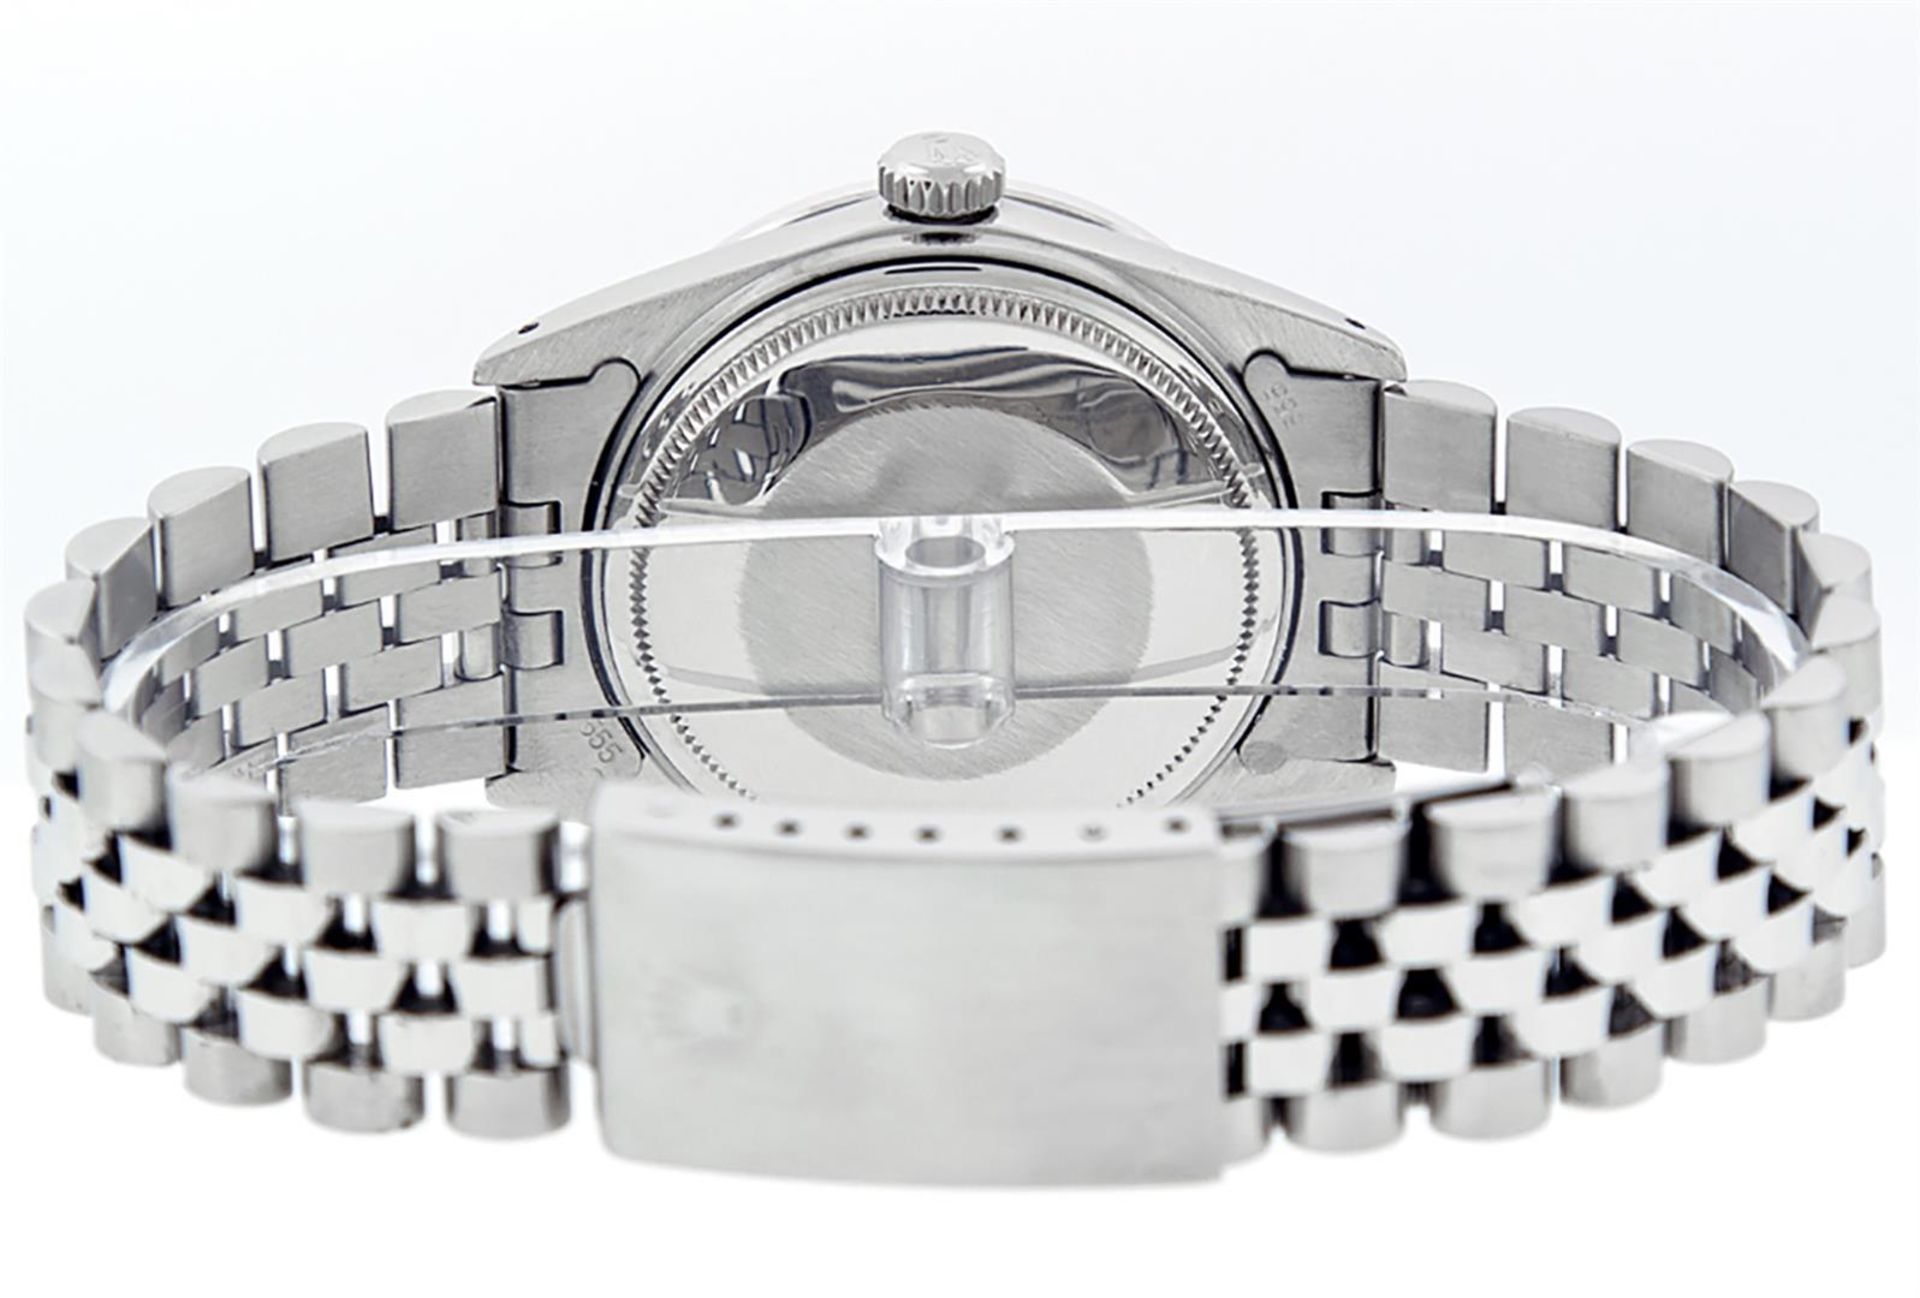 Rolex Mens Datejust 36 Stainless Steel Silver Diamond Oyster Datejust Wristwatch - Image 7 of 9